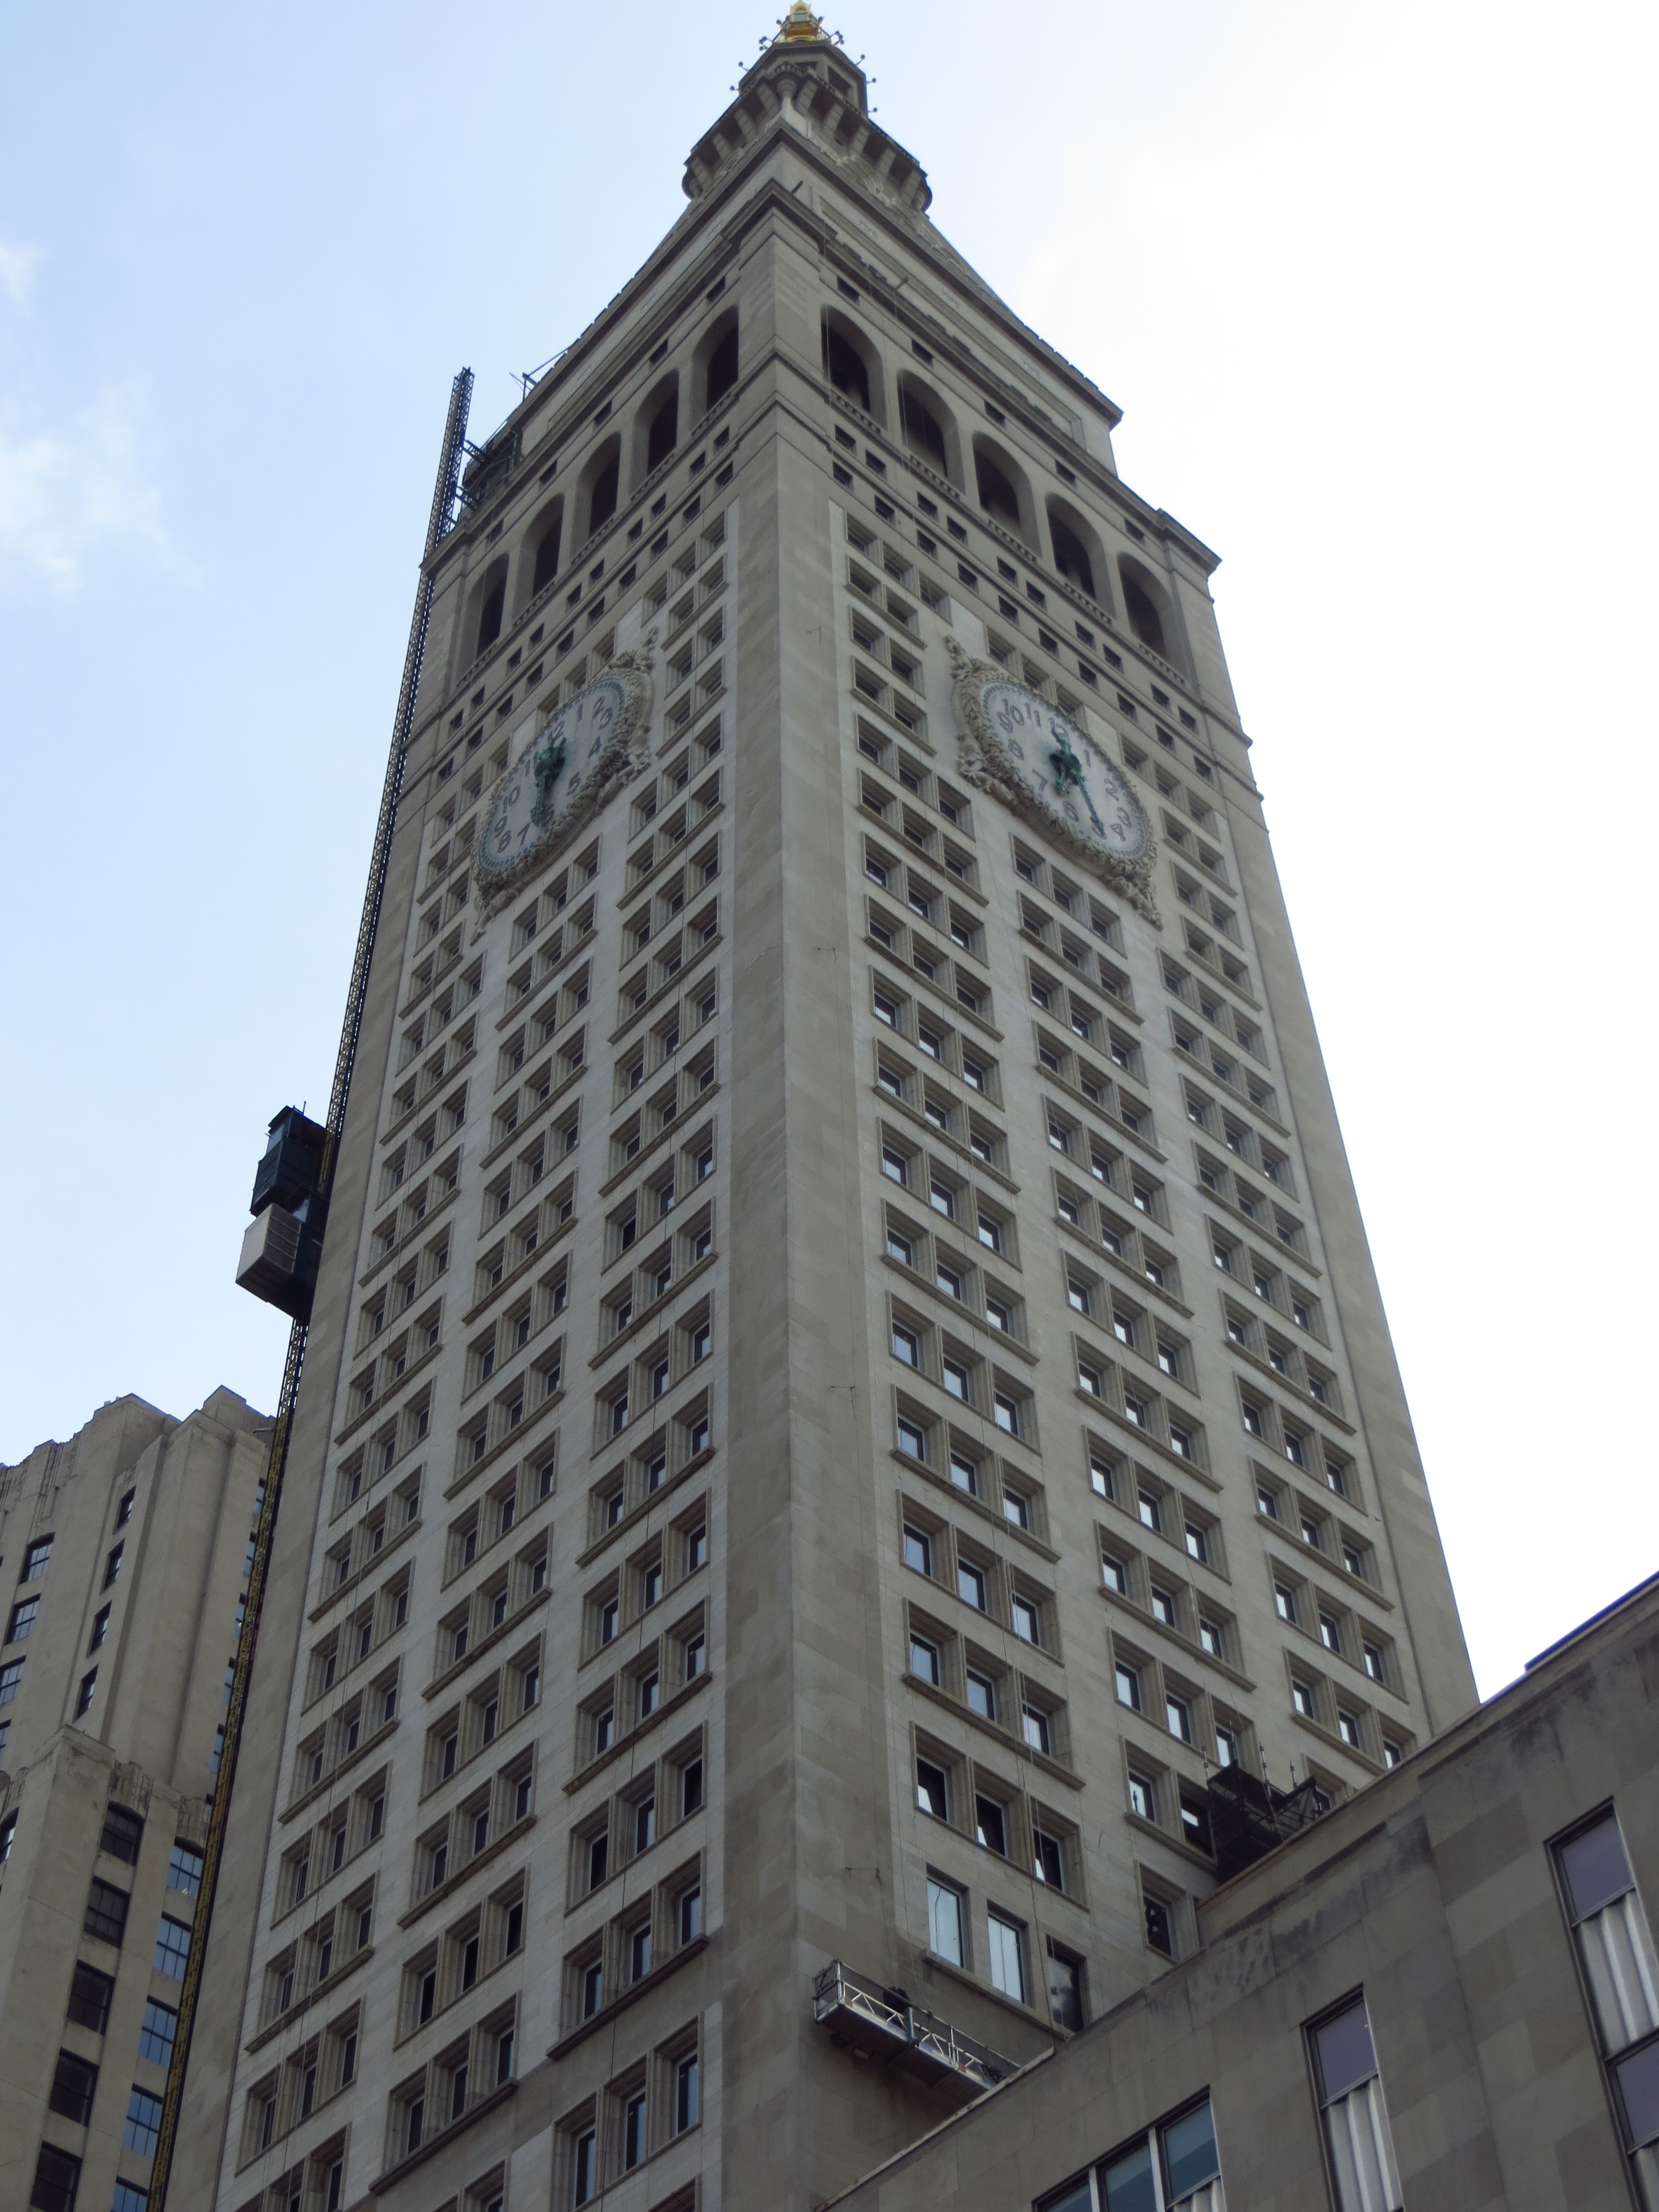 Met Life Tower (built 1909, tallest building in the world for 4 years)